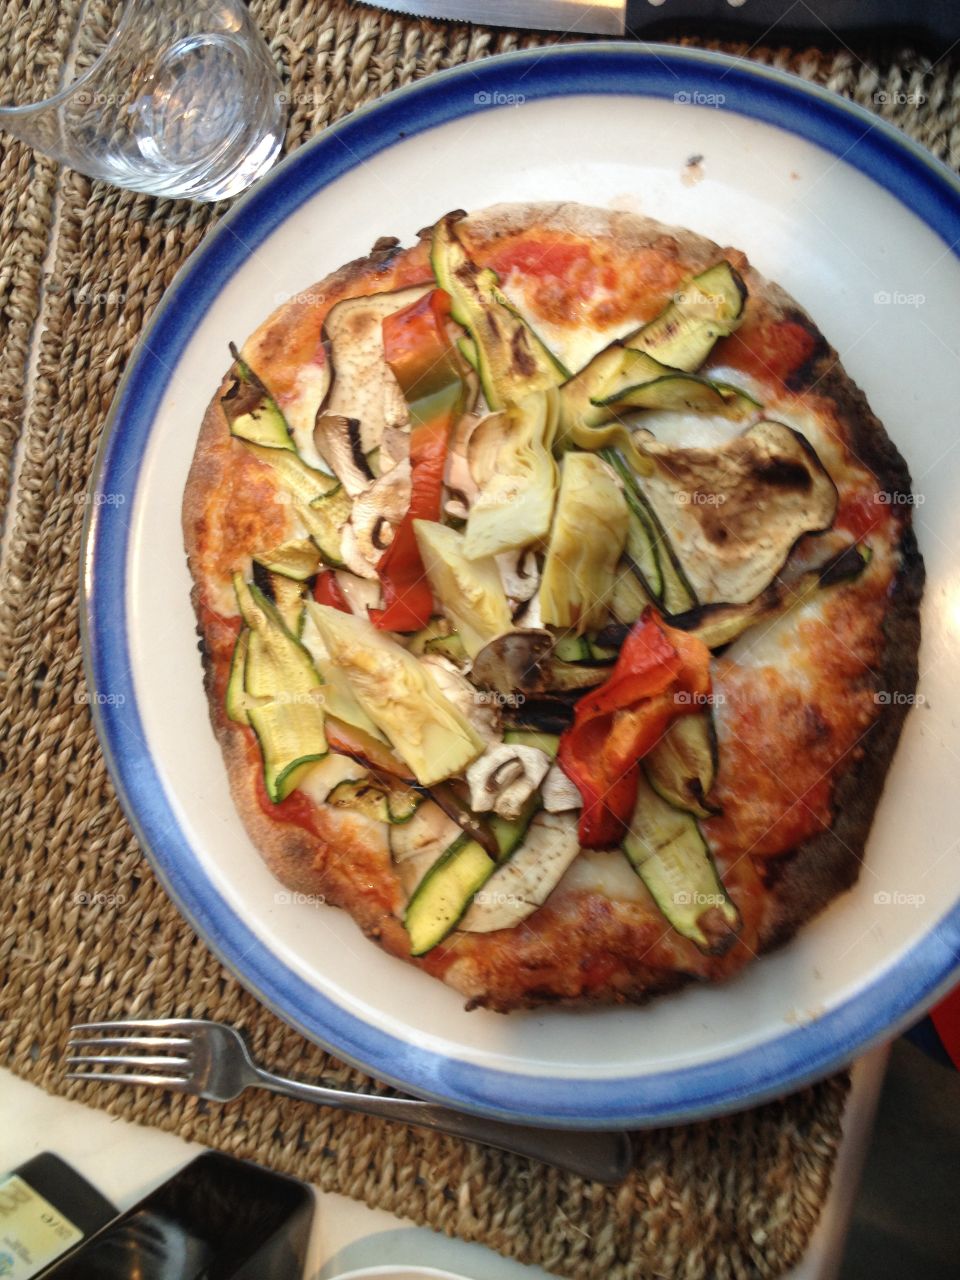 Vegetable pizza in Italy